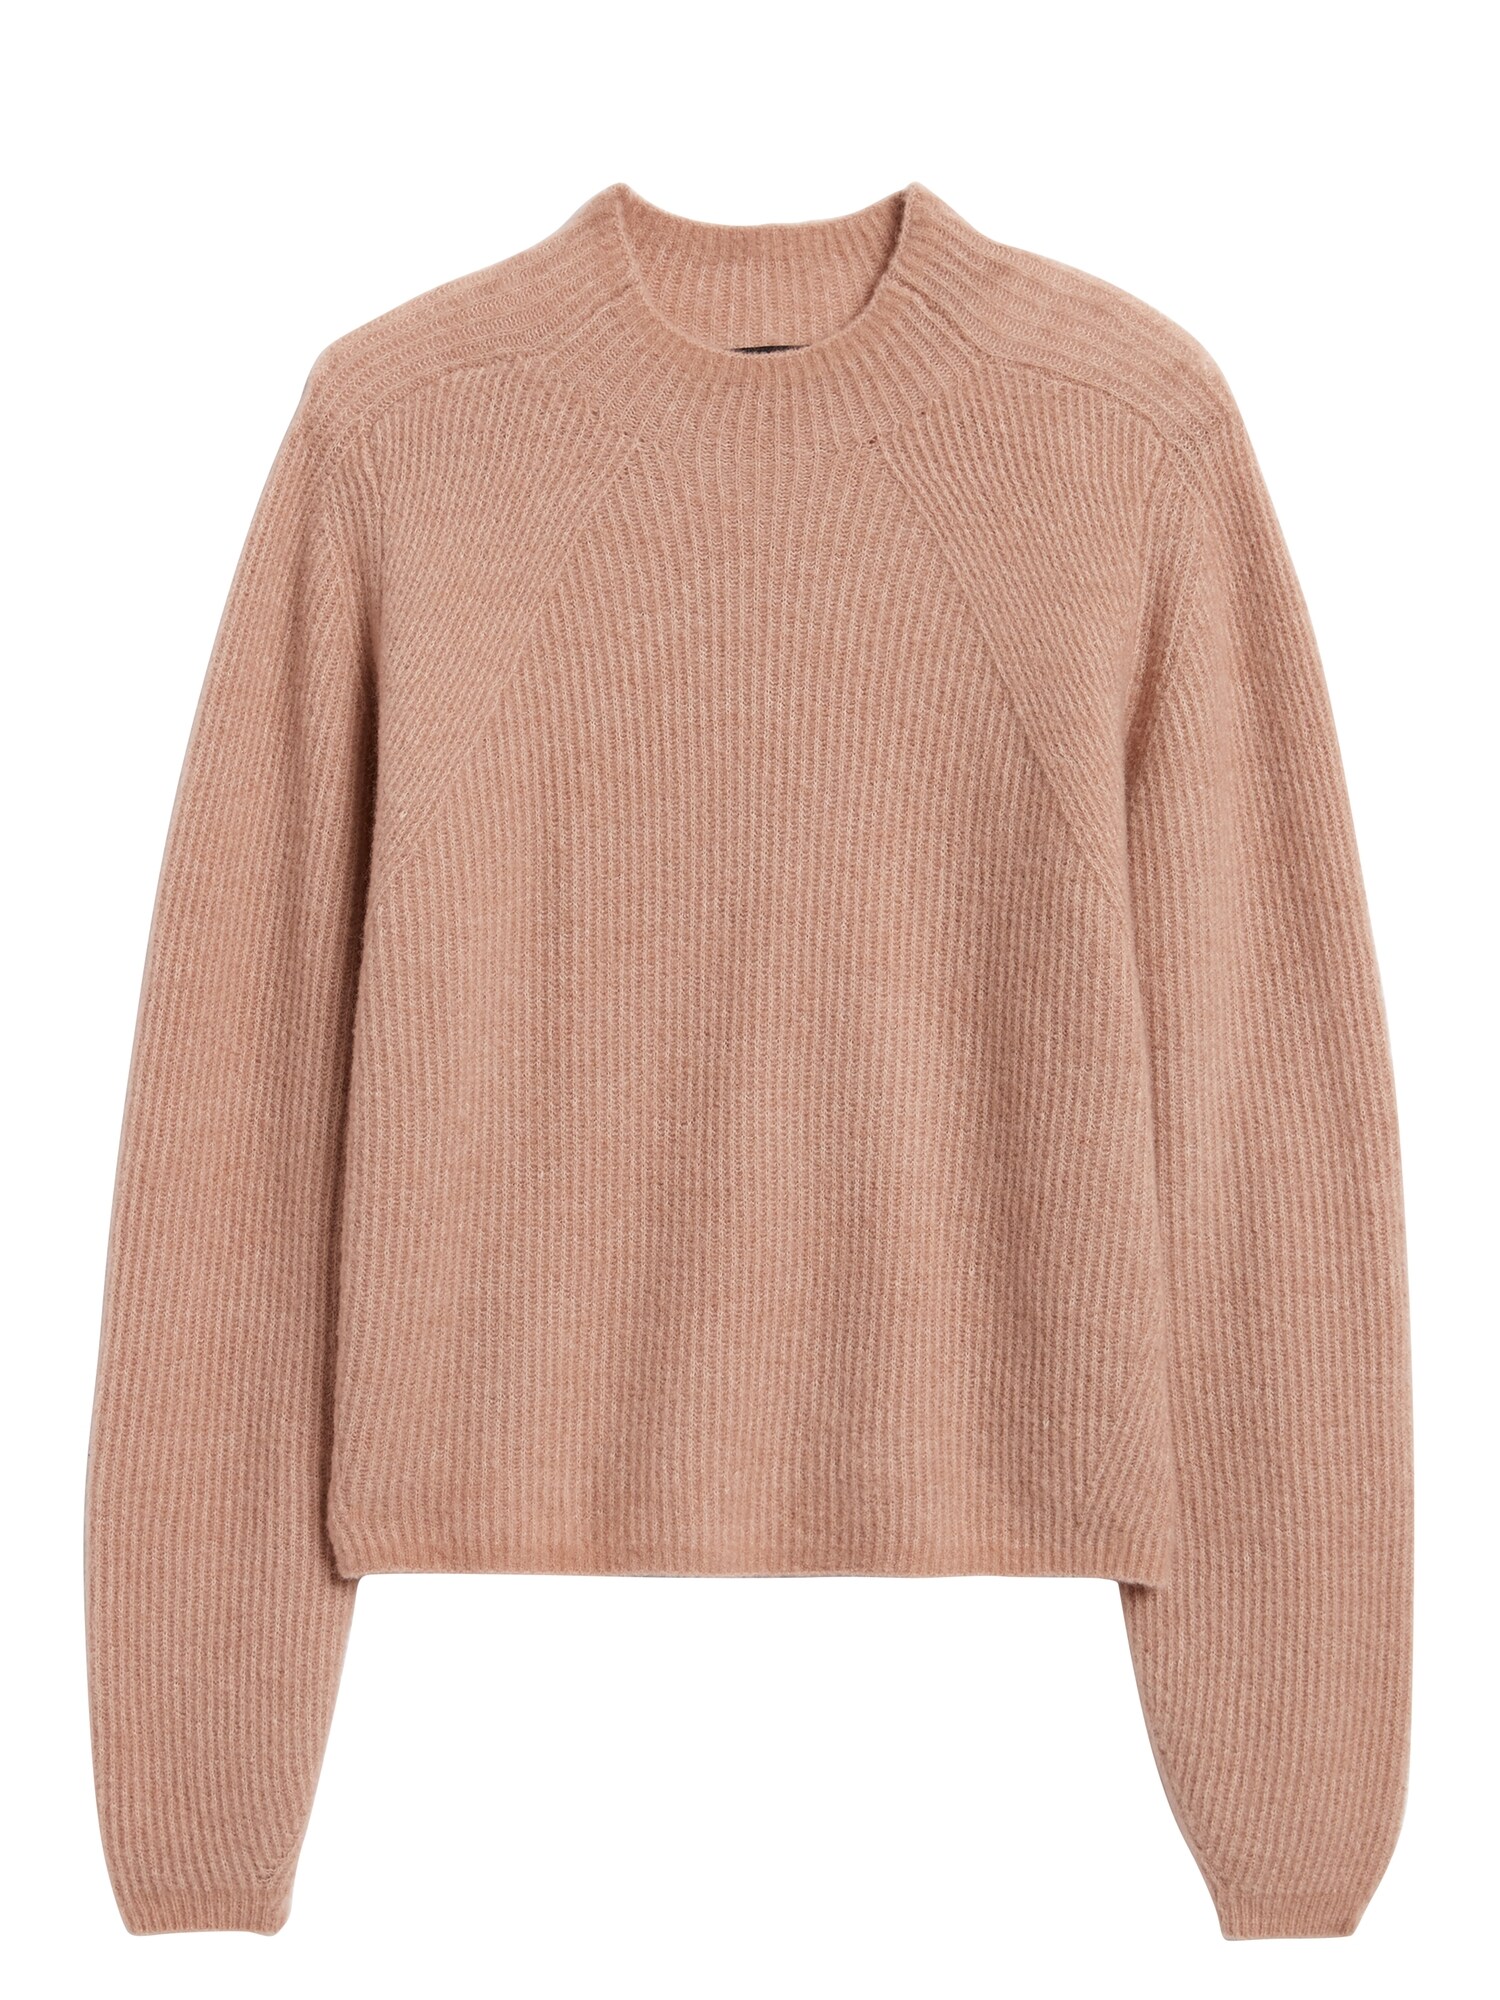 Petite Aire Cropped Puff-Sleeve Sweater